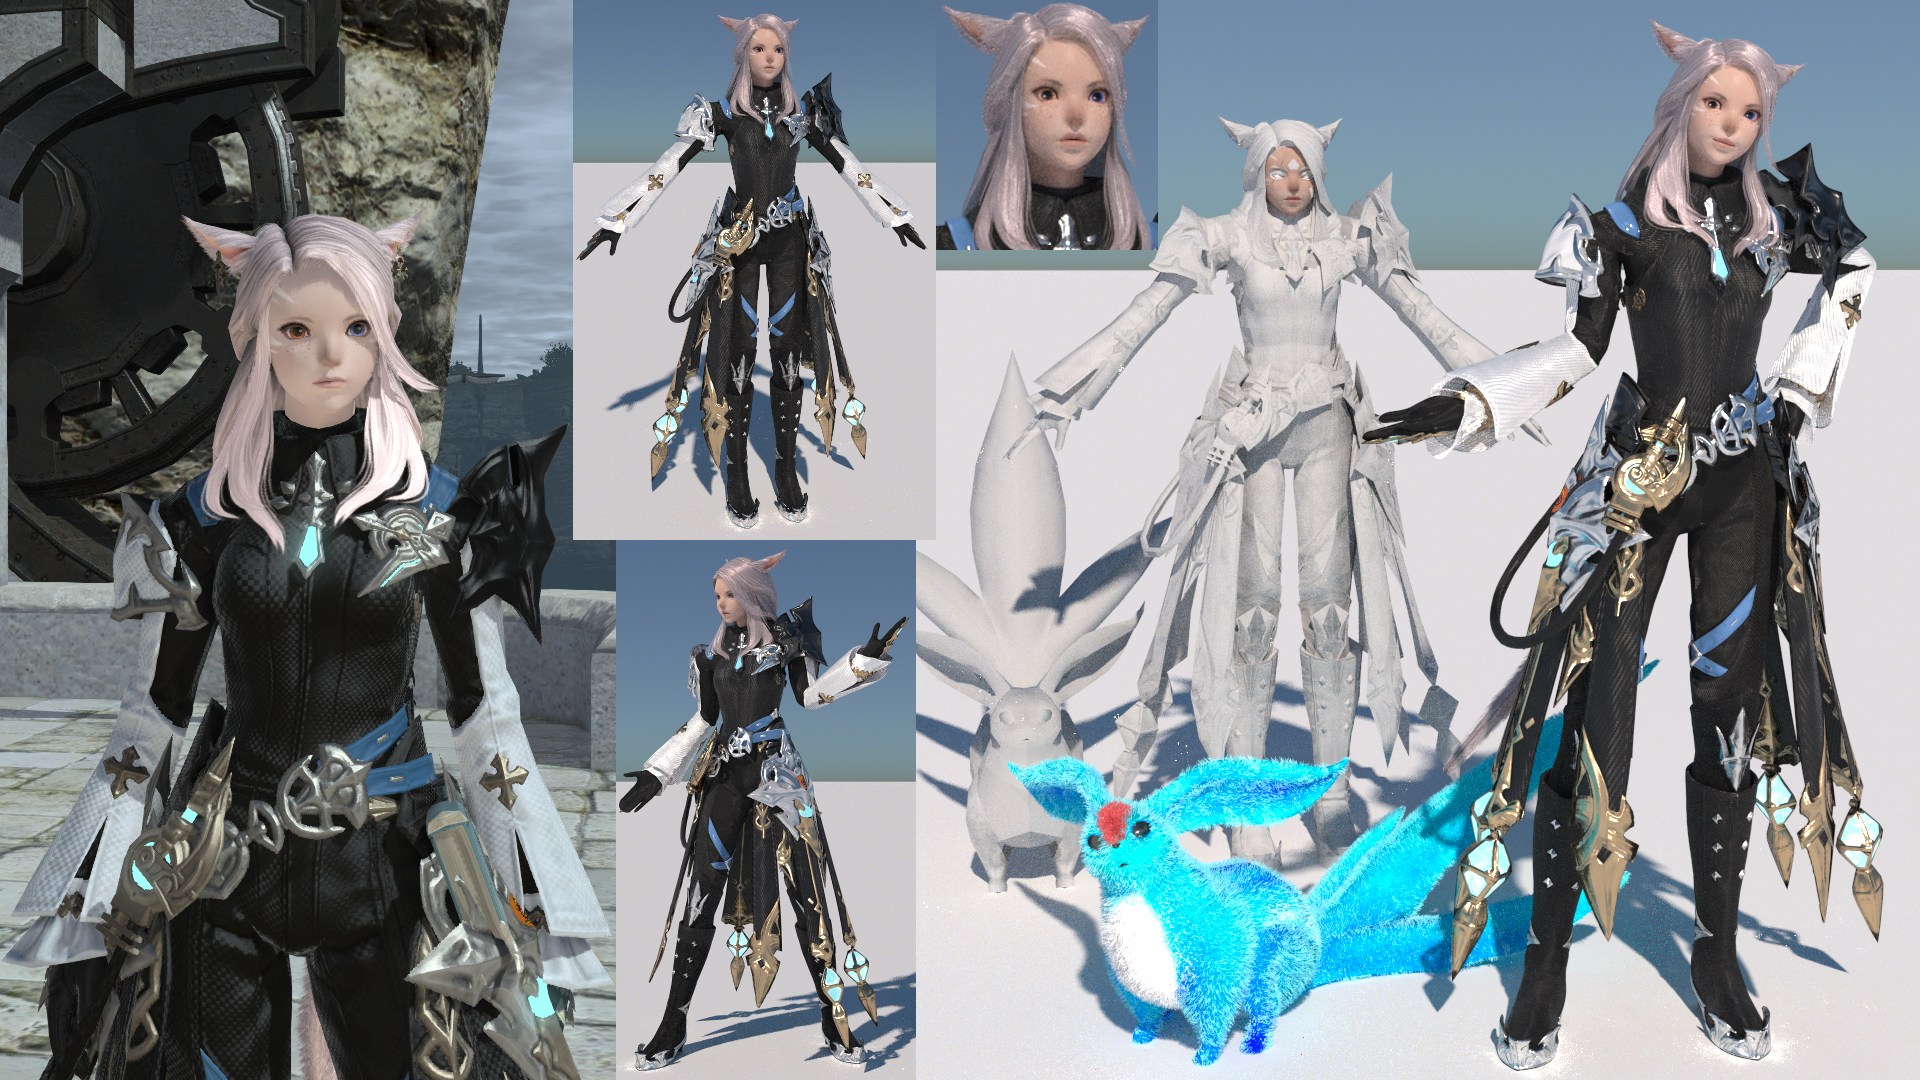 ffxiv_character_extracted_to_blender_by_noasoc50-d9ii907.png